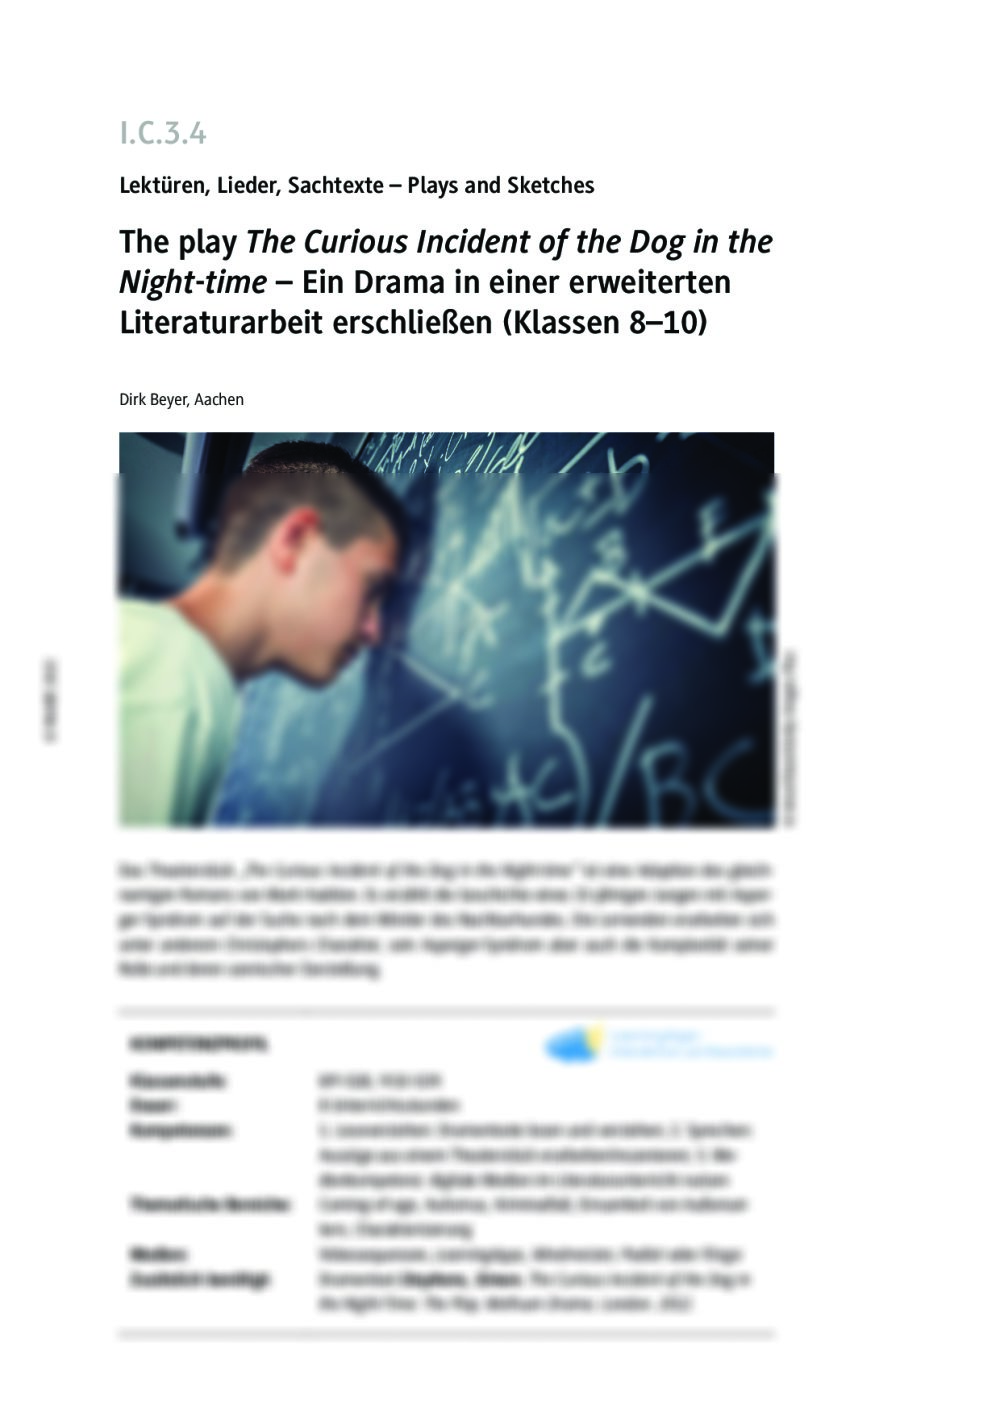 The play "The Curious Incident of the Dog in the Night-time - Seite 1